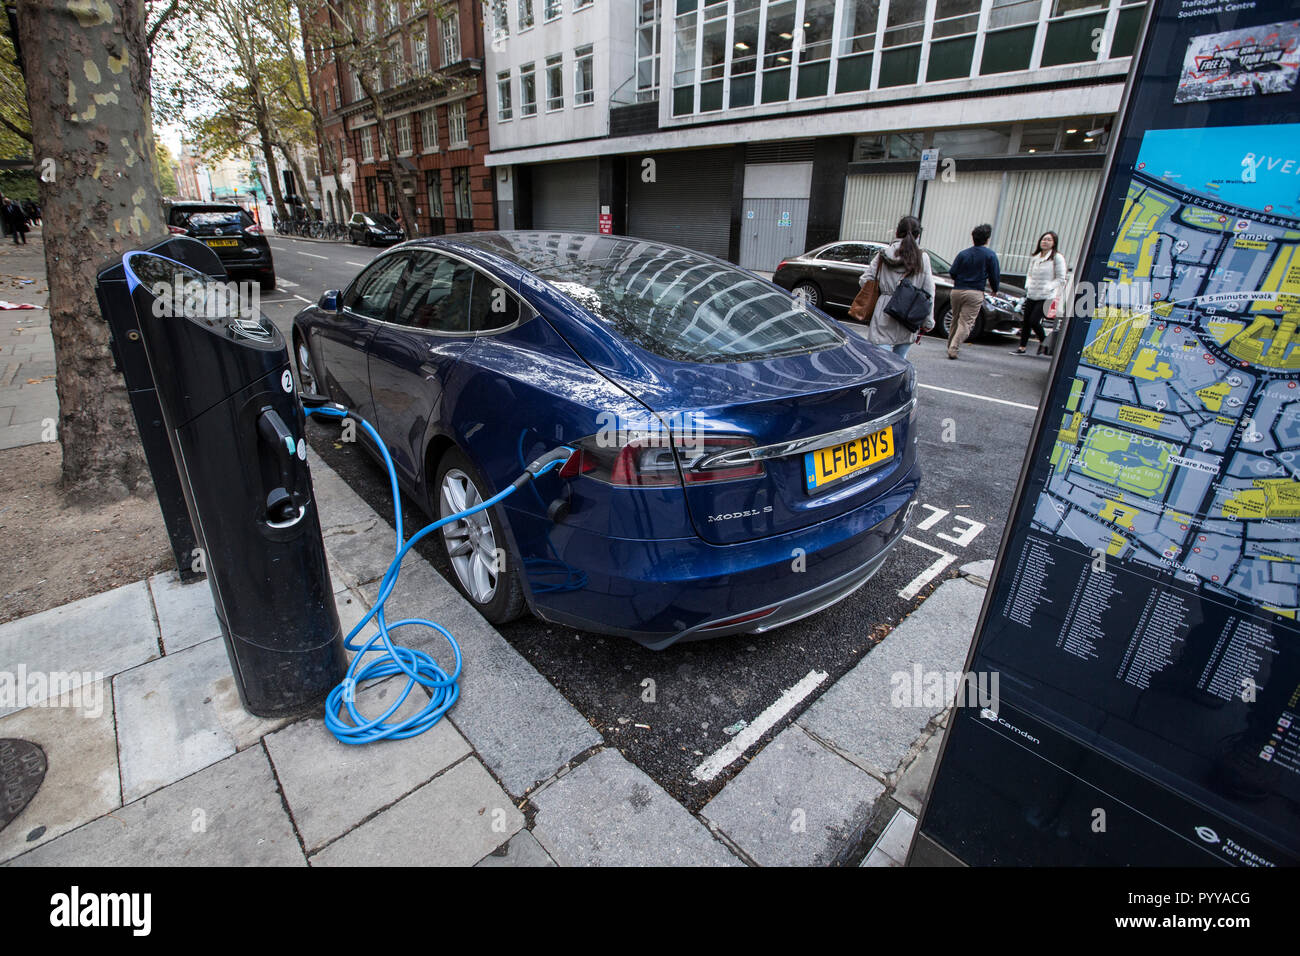 Tesla Model S electric car charging on the street in central London, England, UK Stock Photo